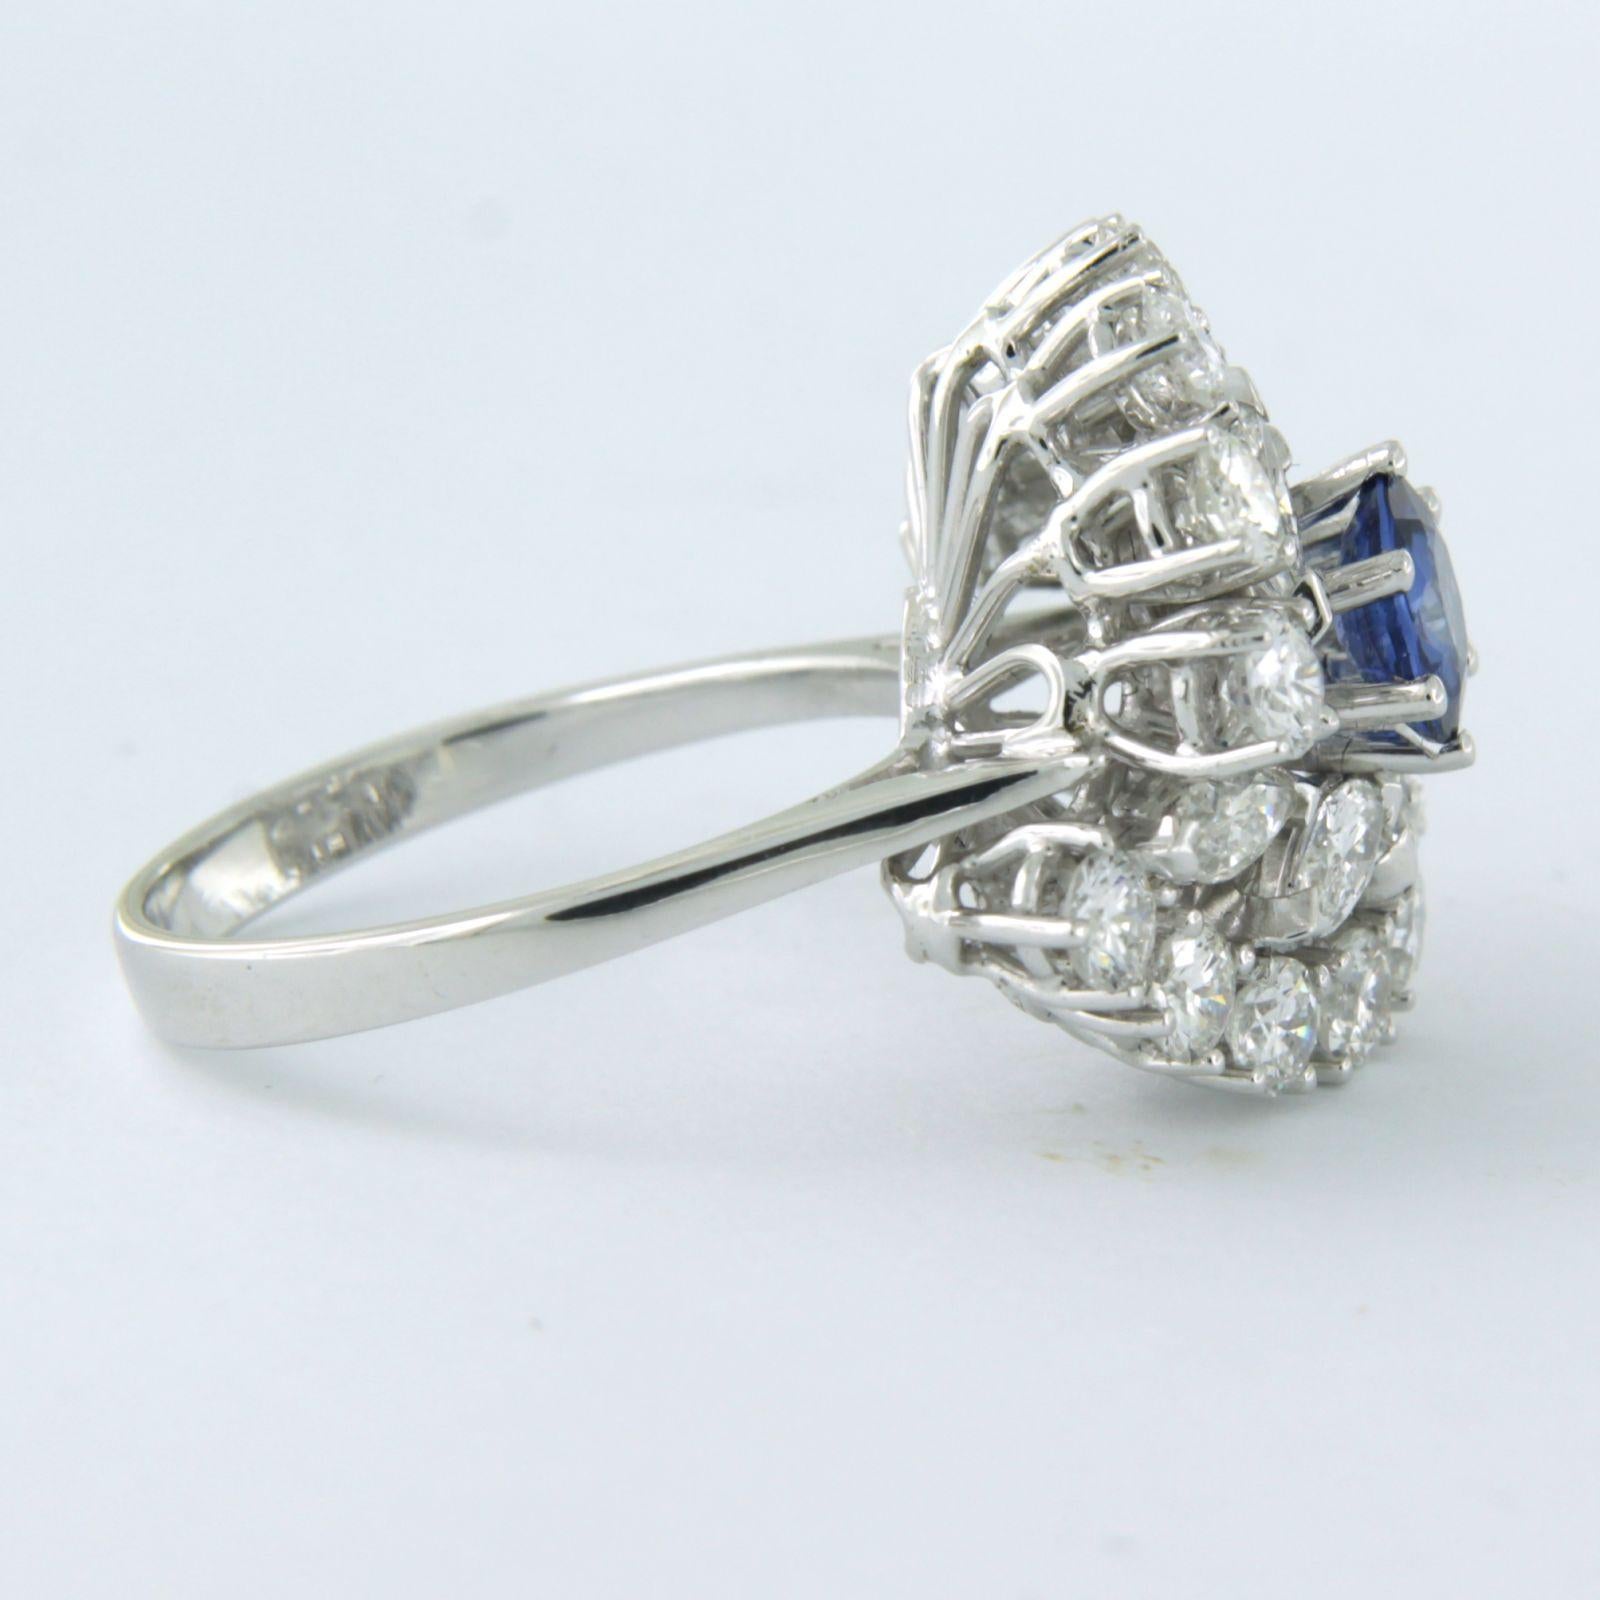 18k white gold cluster ring with a sapphire in the center. 0.70ct and an entourage of brilliant cut diamonds up to. 2.50ct - F/G - VS/SI - ring size U.S. 6 - EU. 16.5(52)

detailed description:

the top of the ring has a diameter of 1.8 cm wide by